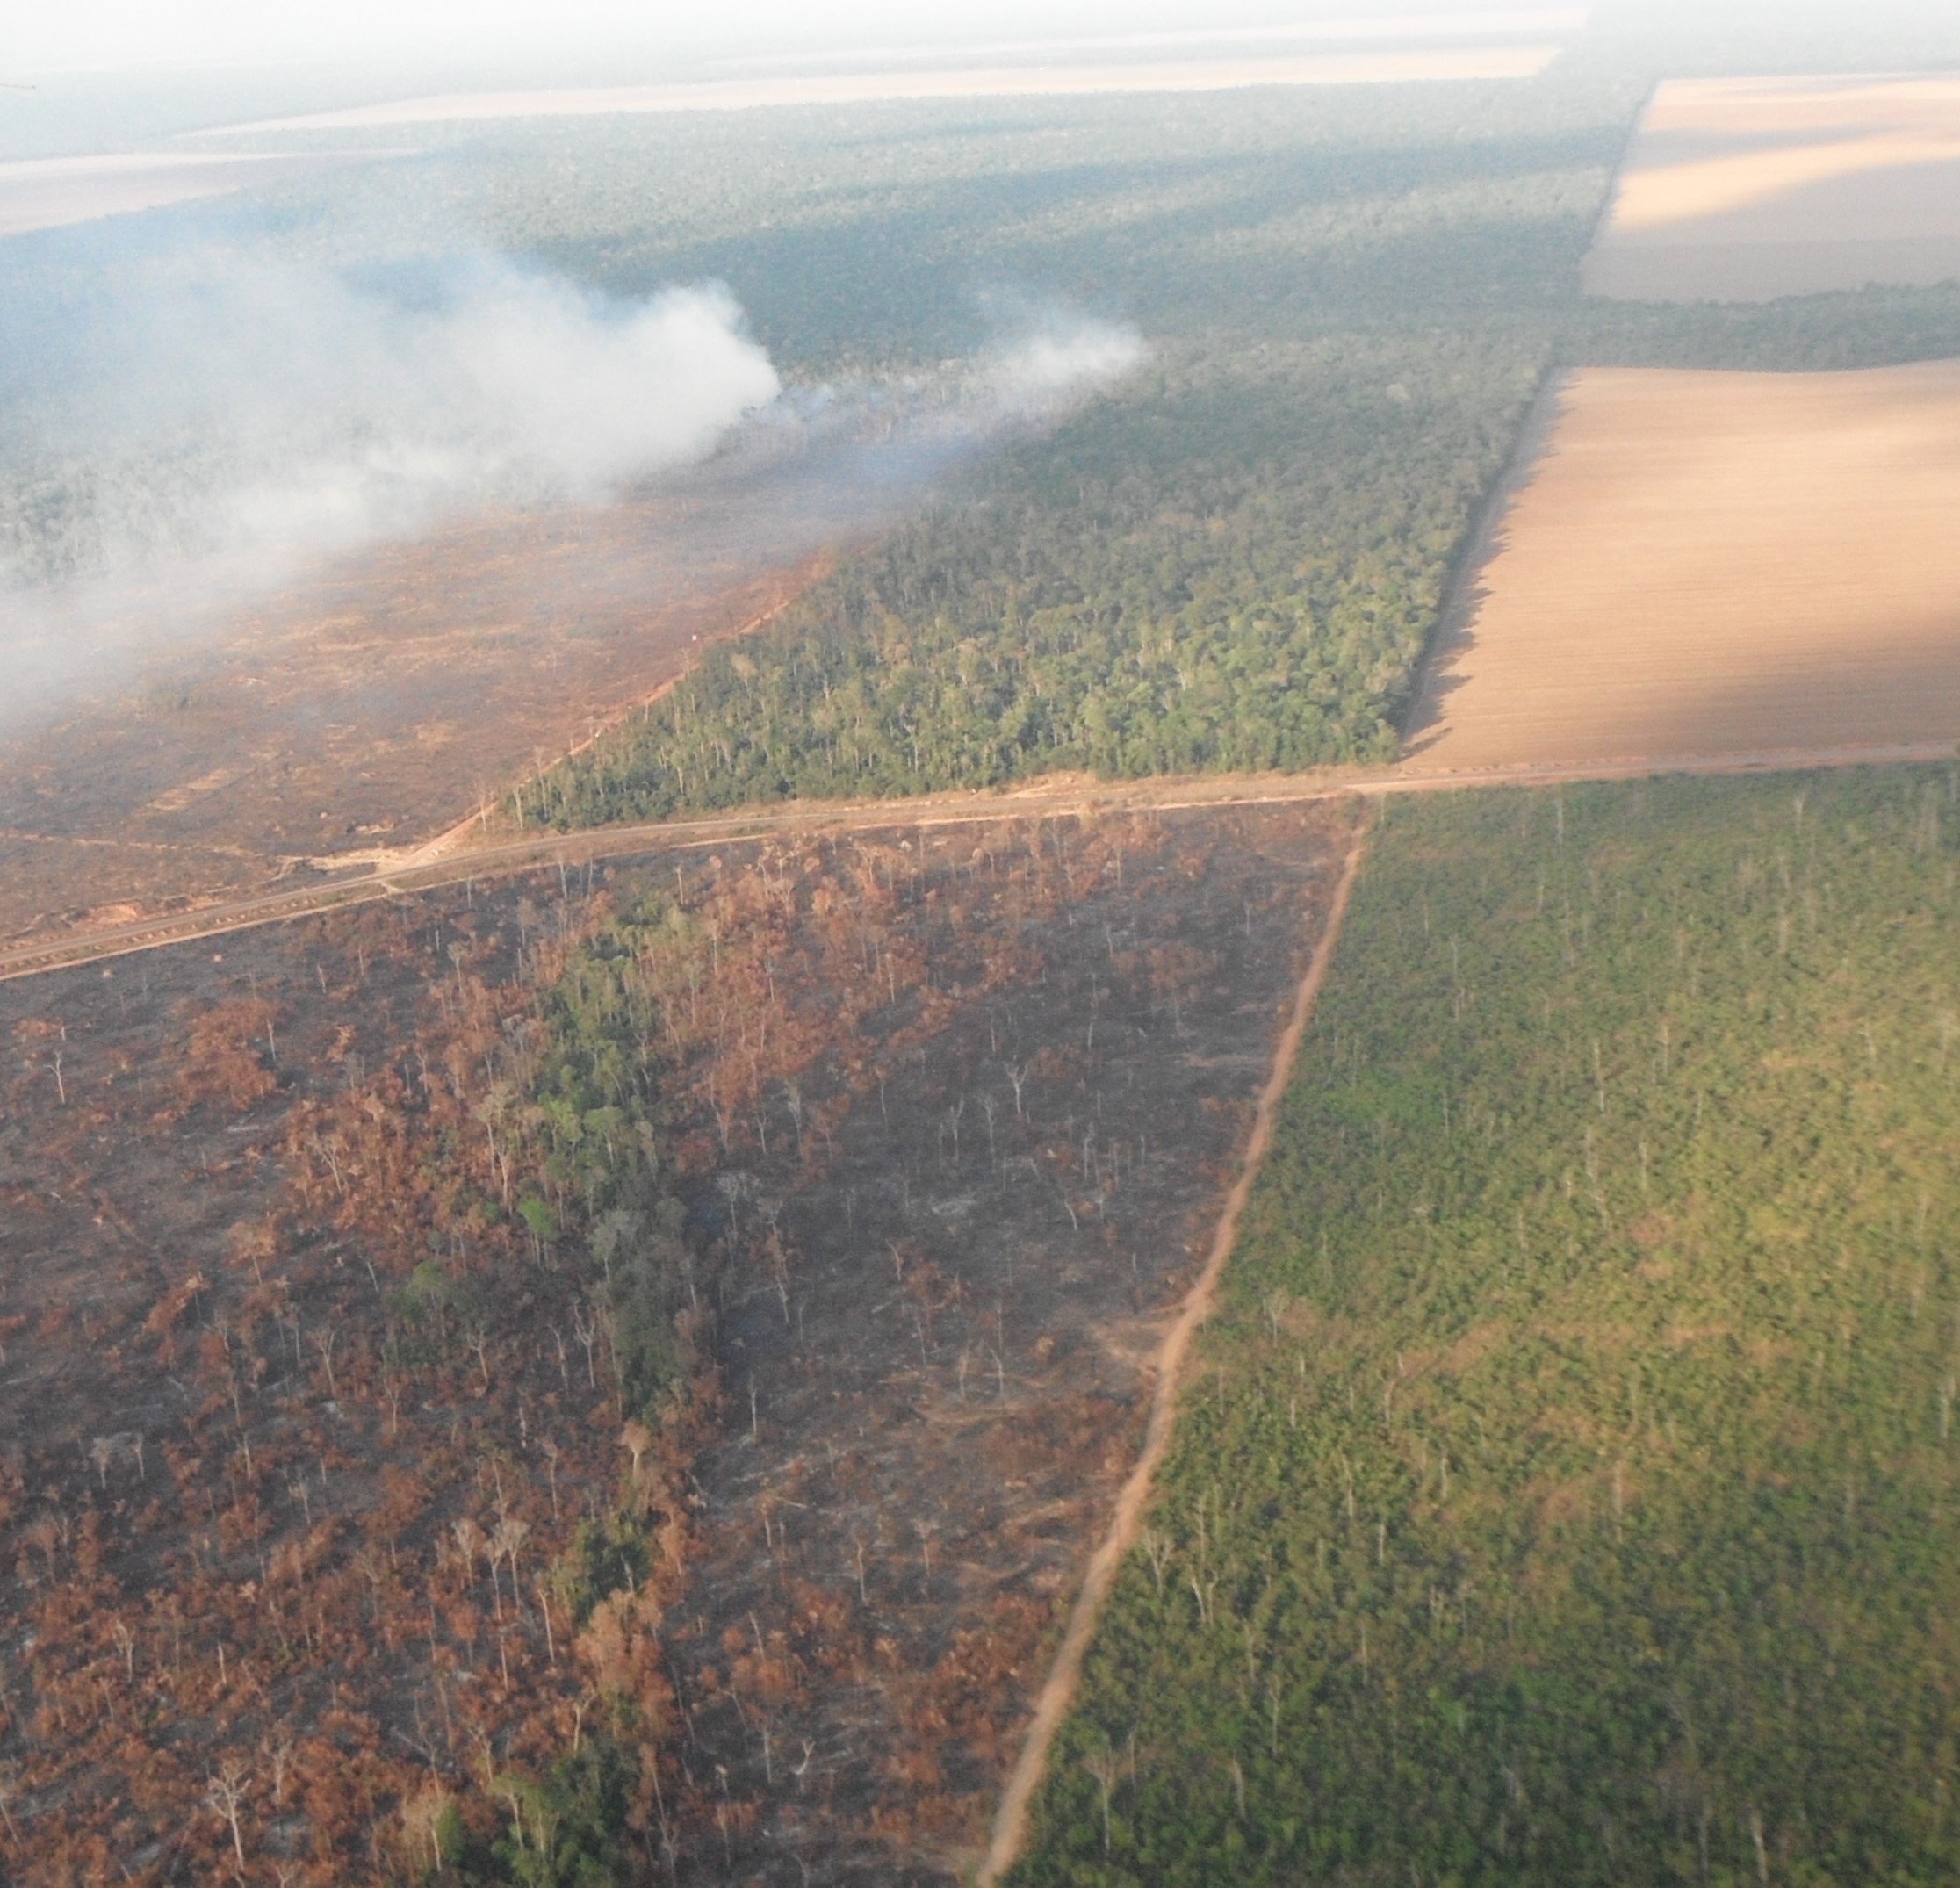 Burned and fragmented forest in the Amazon